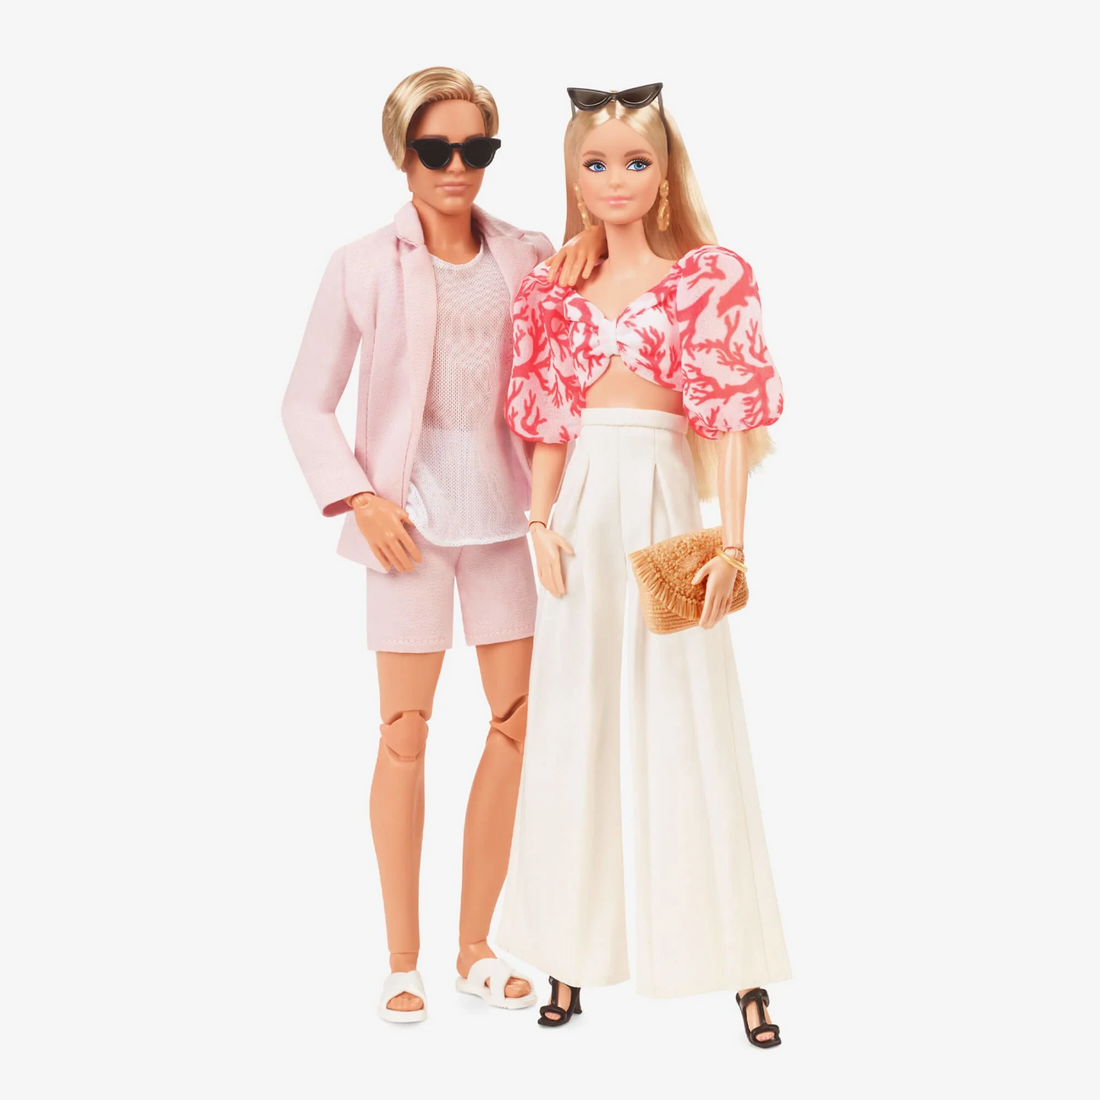 Barbie And Ken Doll Two-Pack For @Barbiestyle, Resort-Wear Fashions - Dolls and Accessories